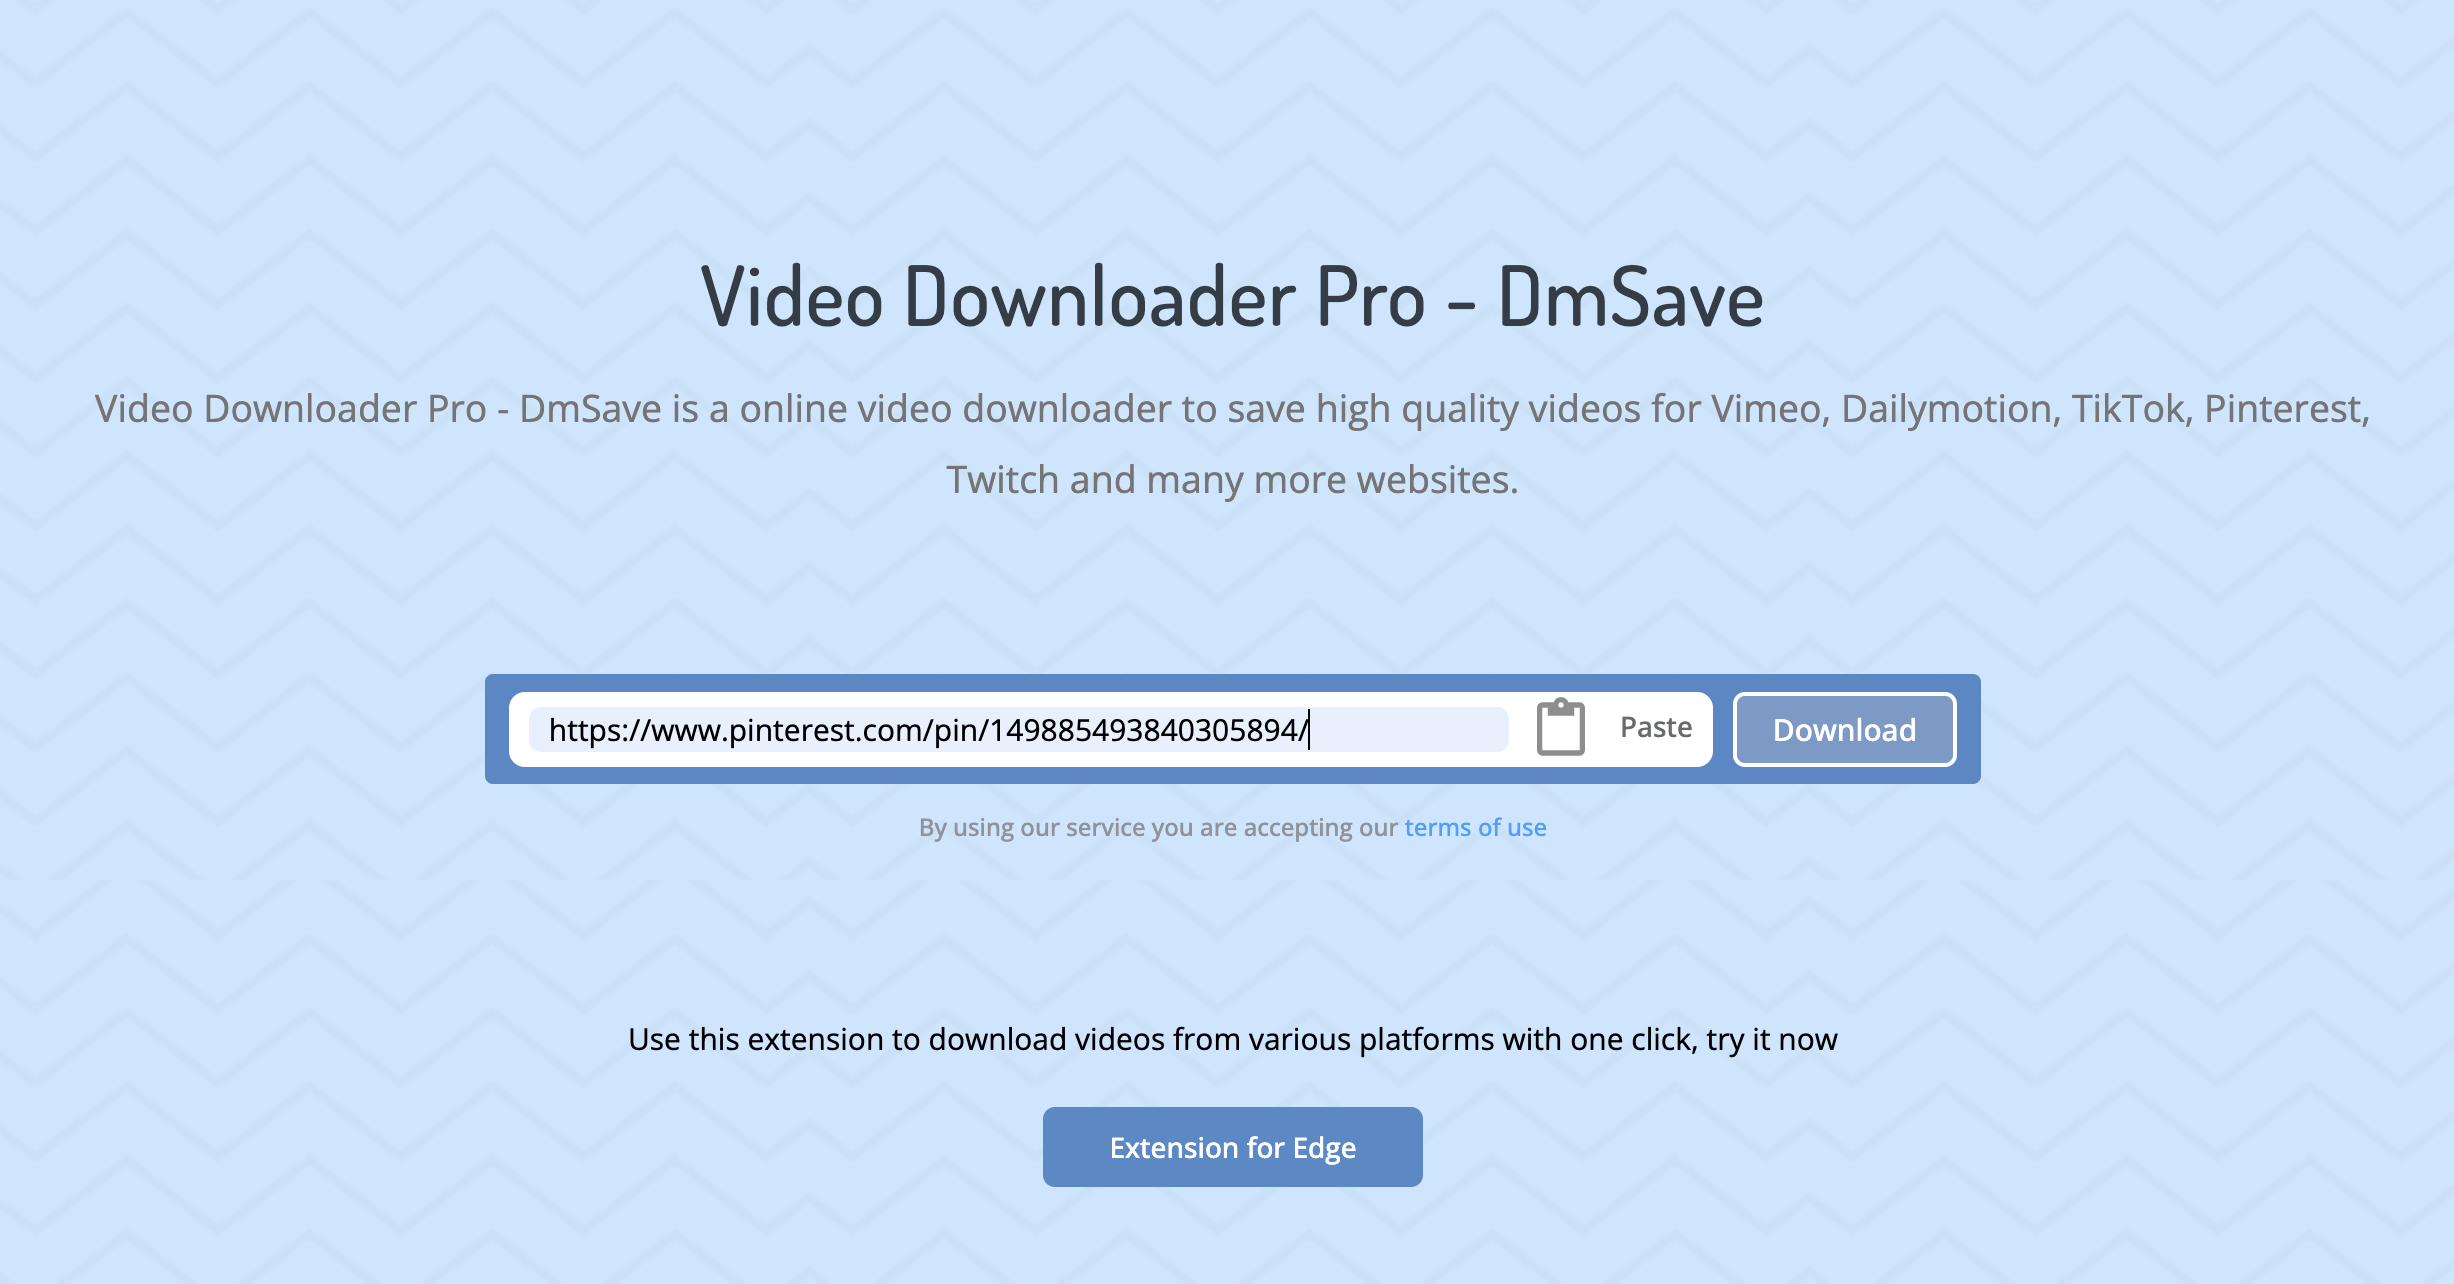 Go to Video Downloader Pro - DmSavePaste the URL into the input box and click Download button